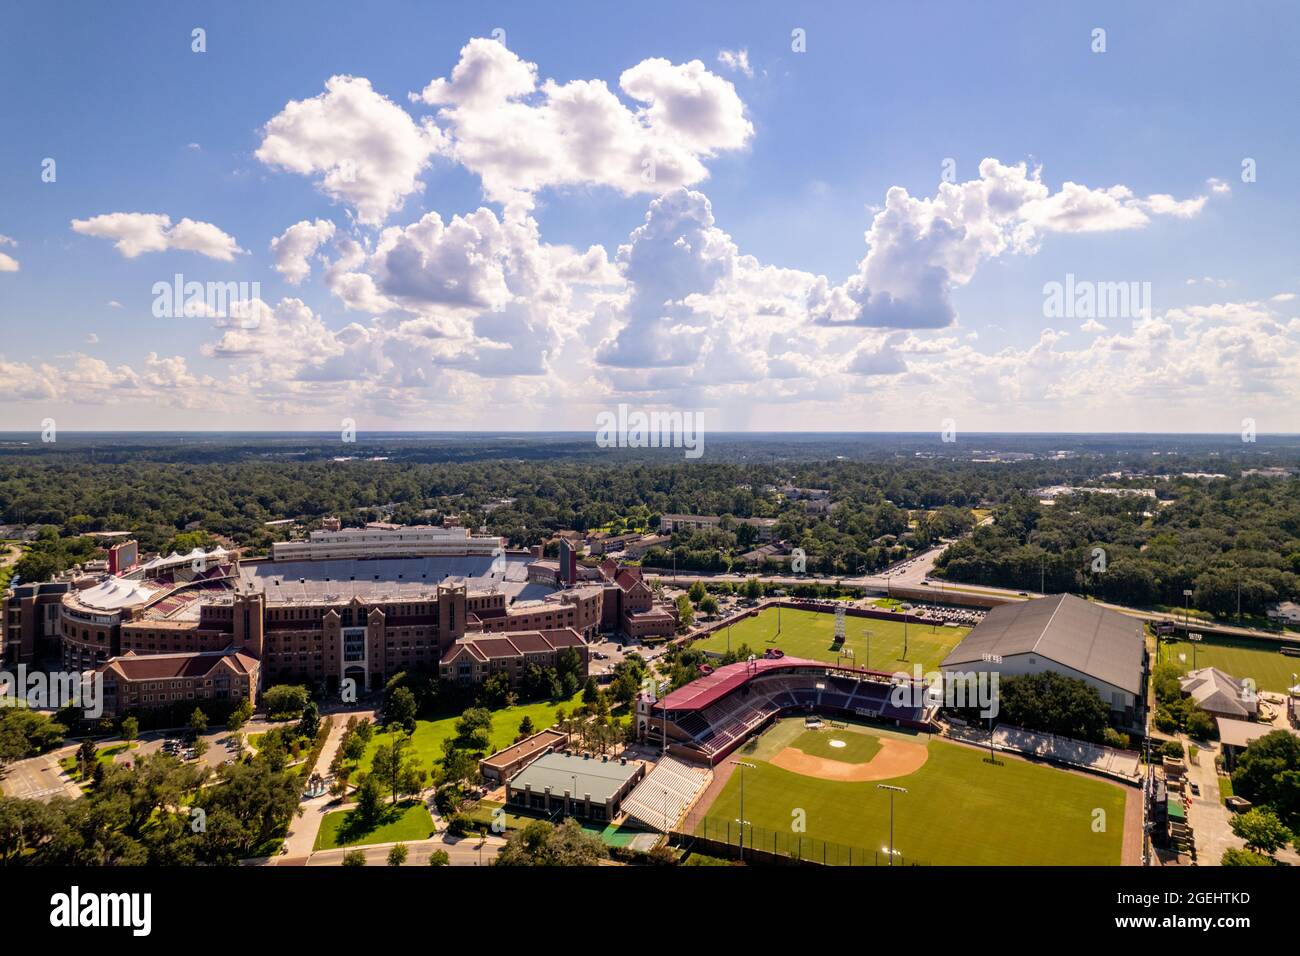 Tallahassee, FL, USA - August 15, 2021: Aerial photo Bobby Bowden Field at Doak Campbell Stadium Stock Photo